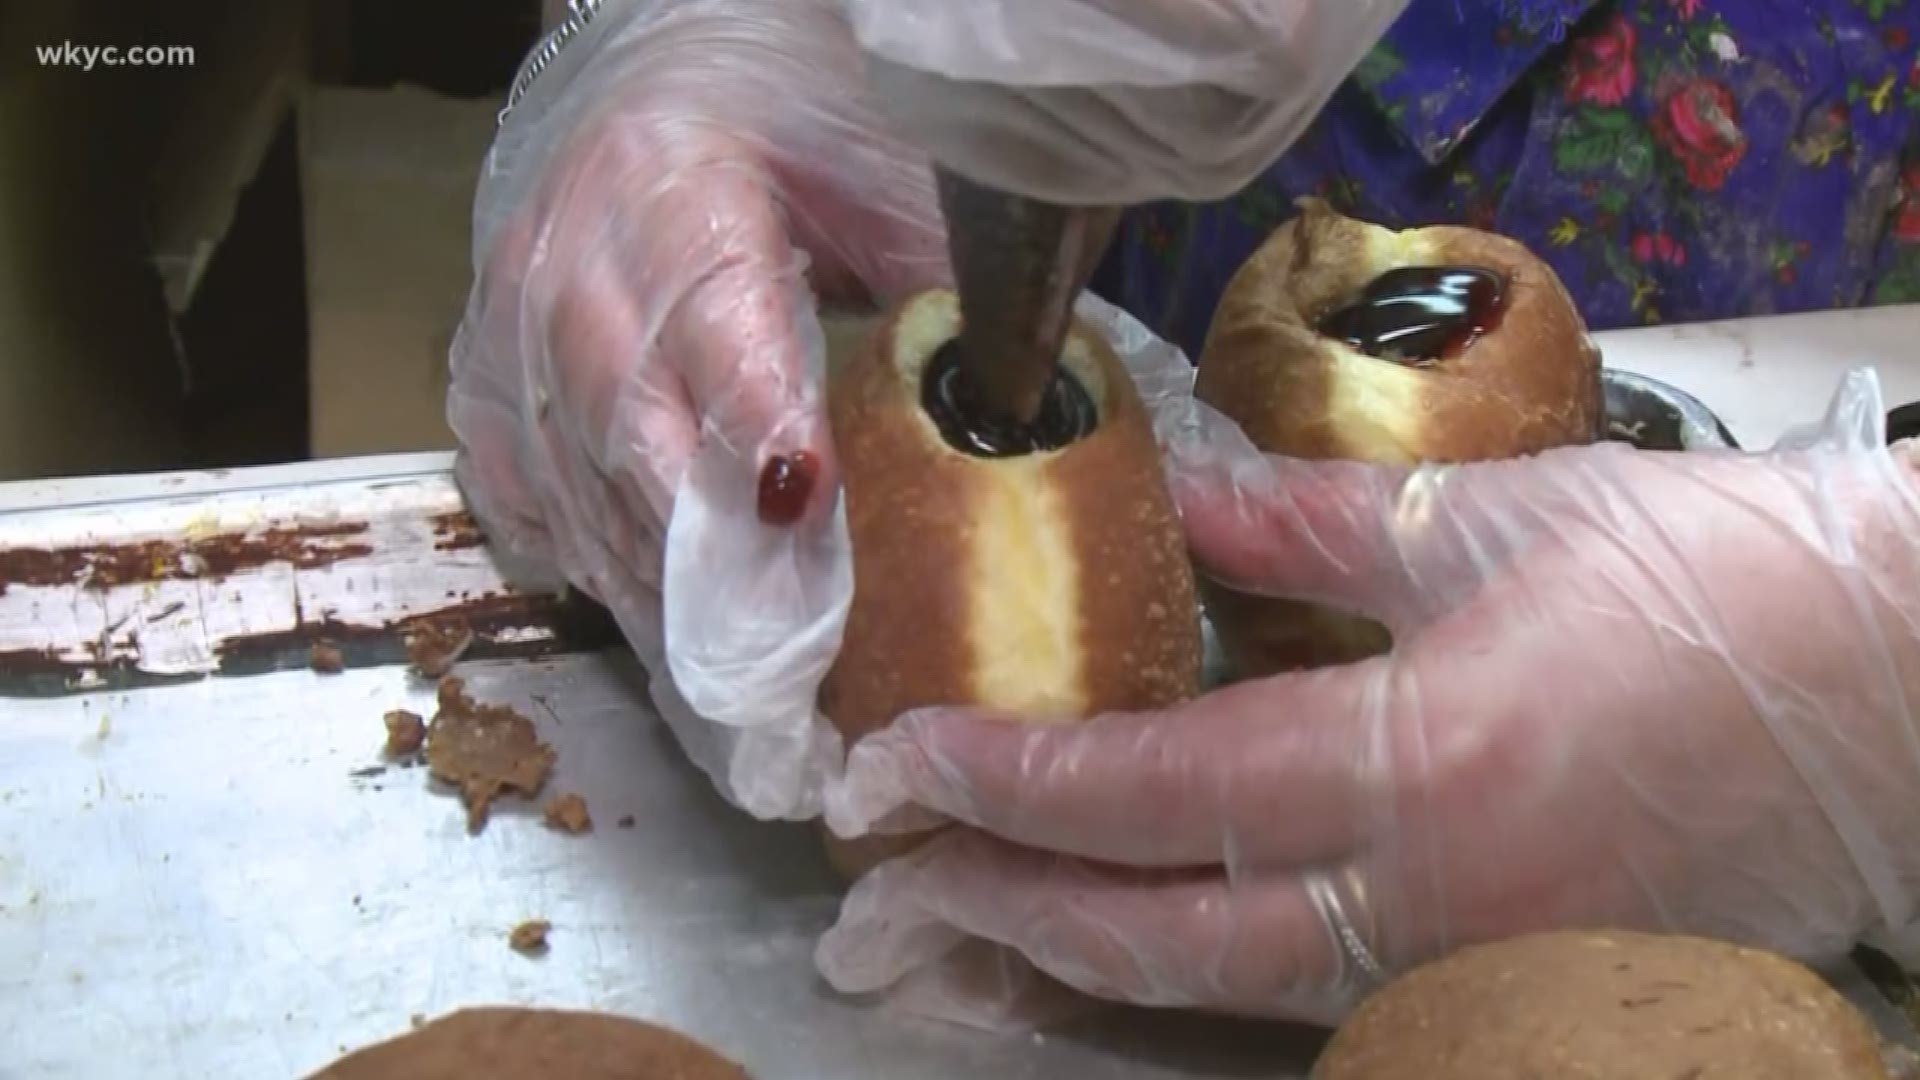 March 5, 2019: It's Fat Tuesday, which can only mean one thing: It's time for some paczki from Rudy's in Parma.